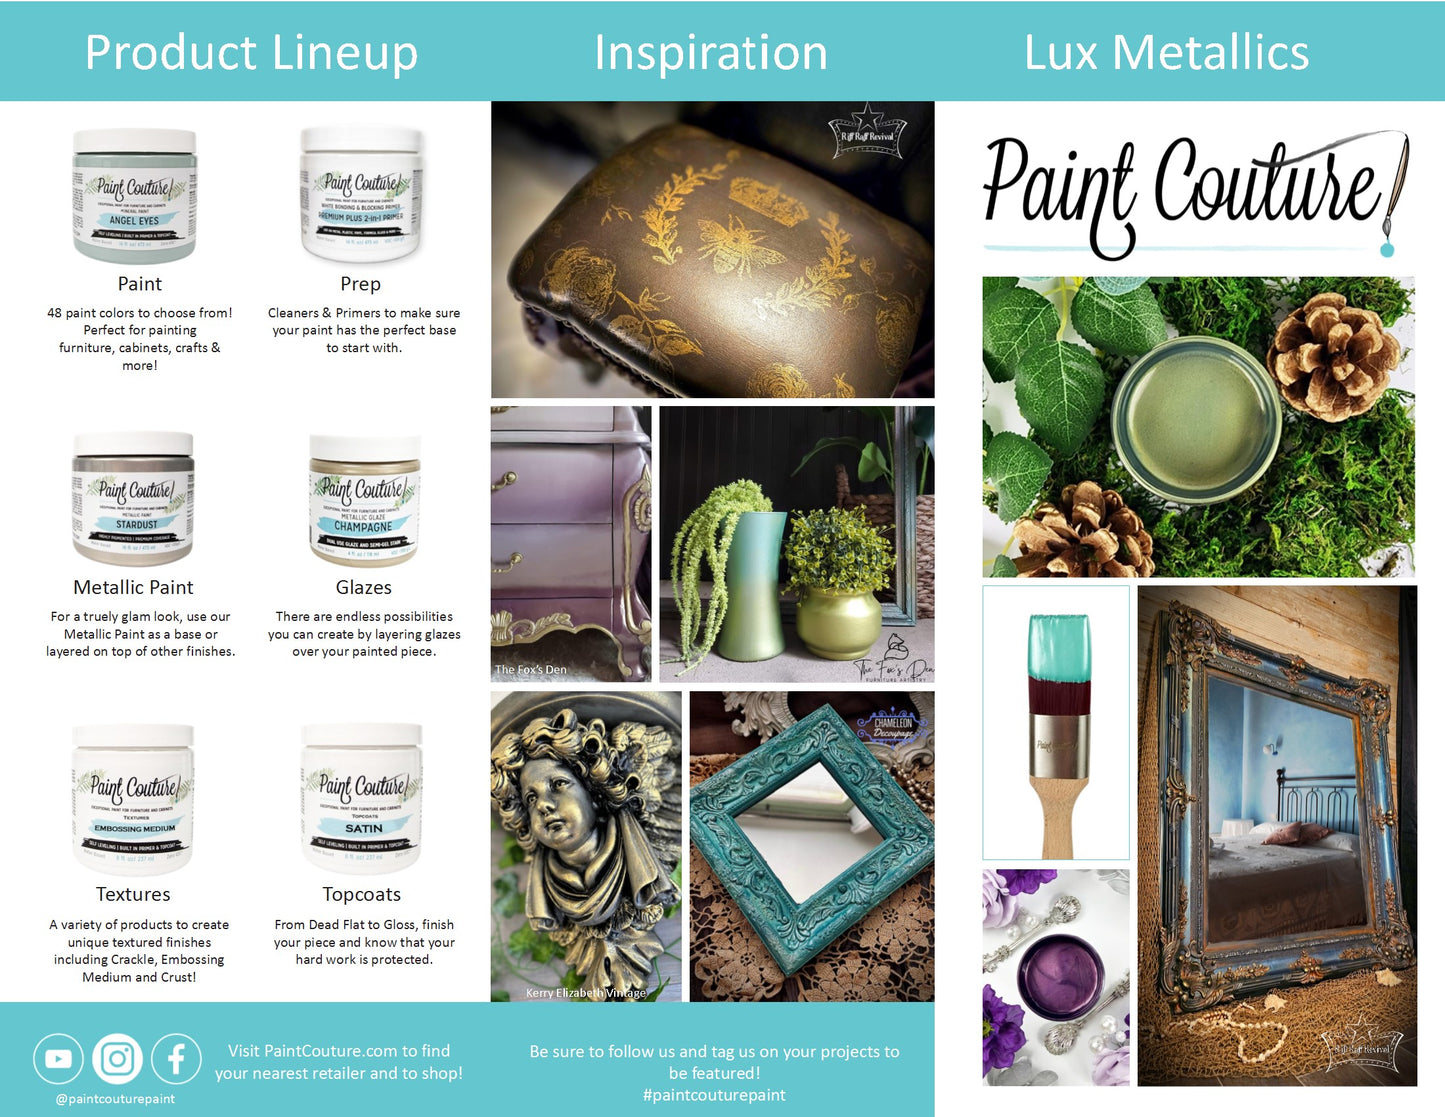 Paint Couture Lux Metallic Paint Meadow